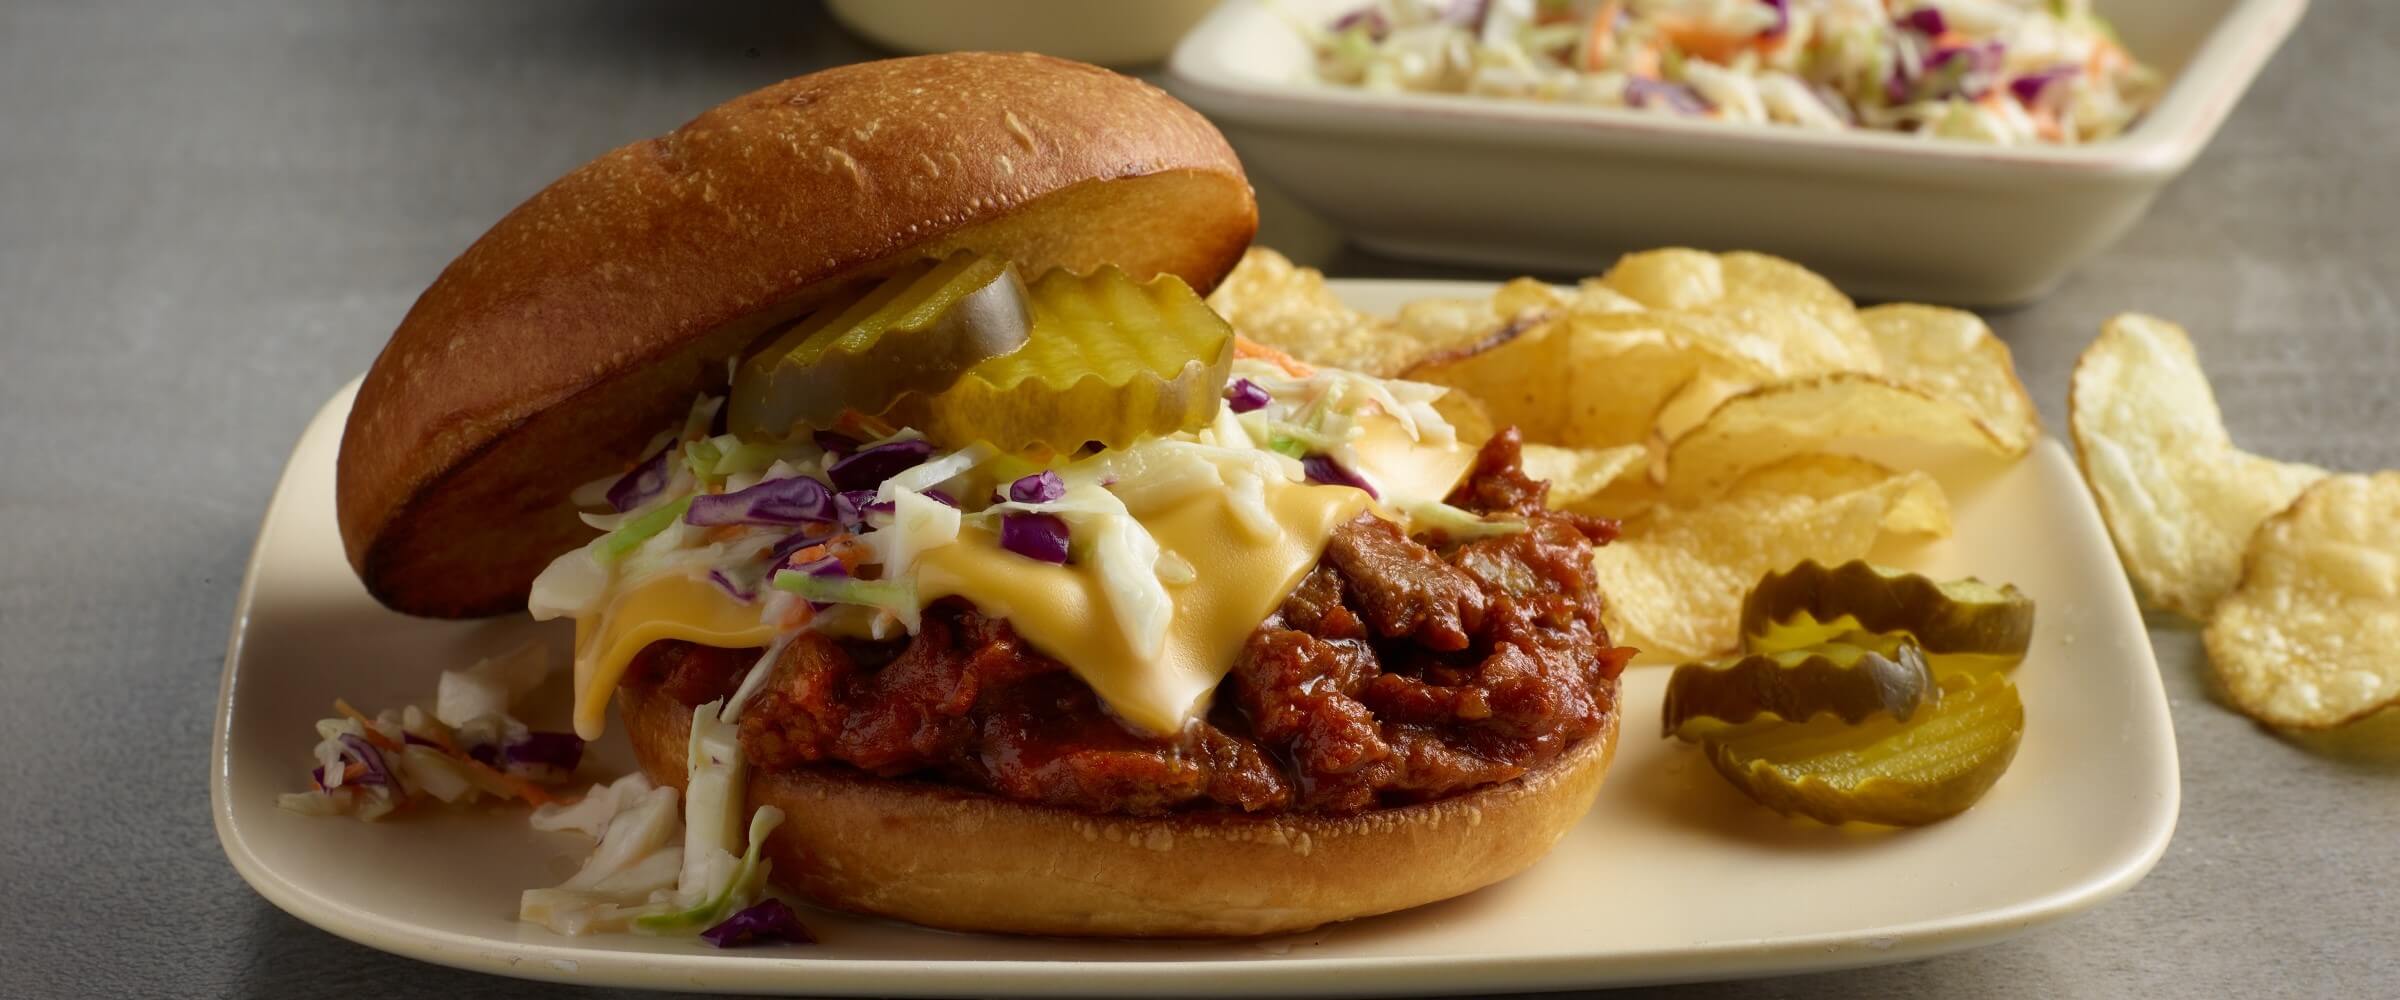 BBQ pork burgers topped with slaw, cheese and pickles with potato chips on plate